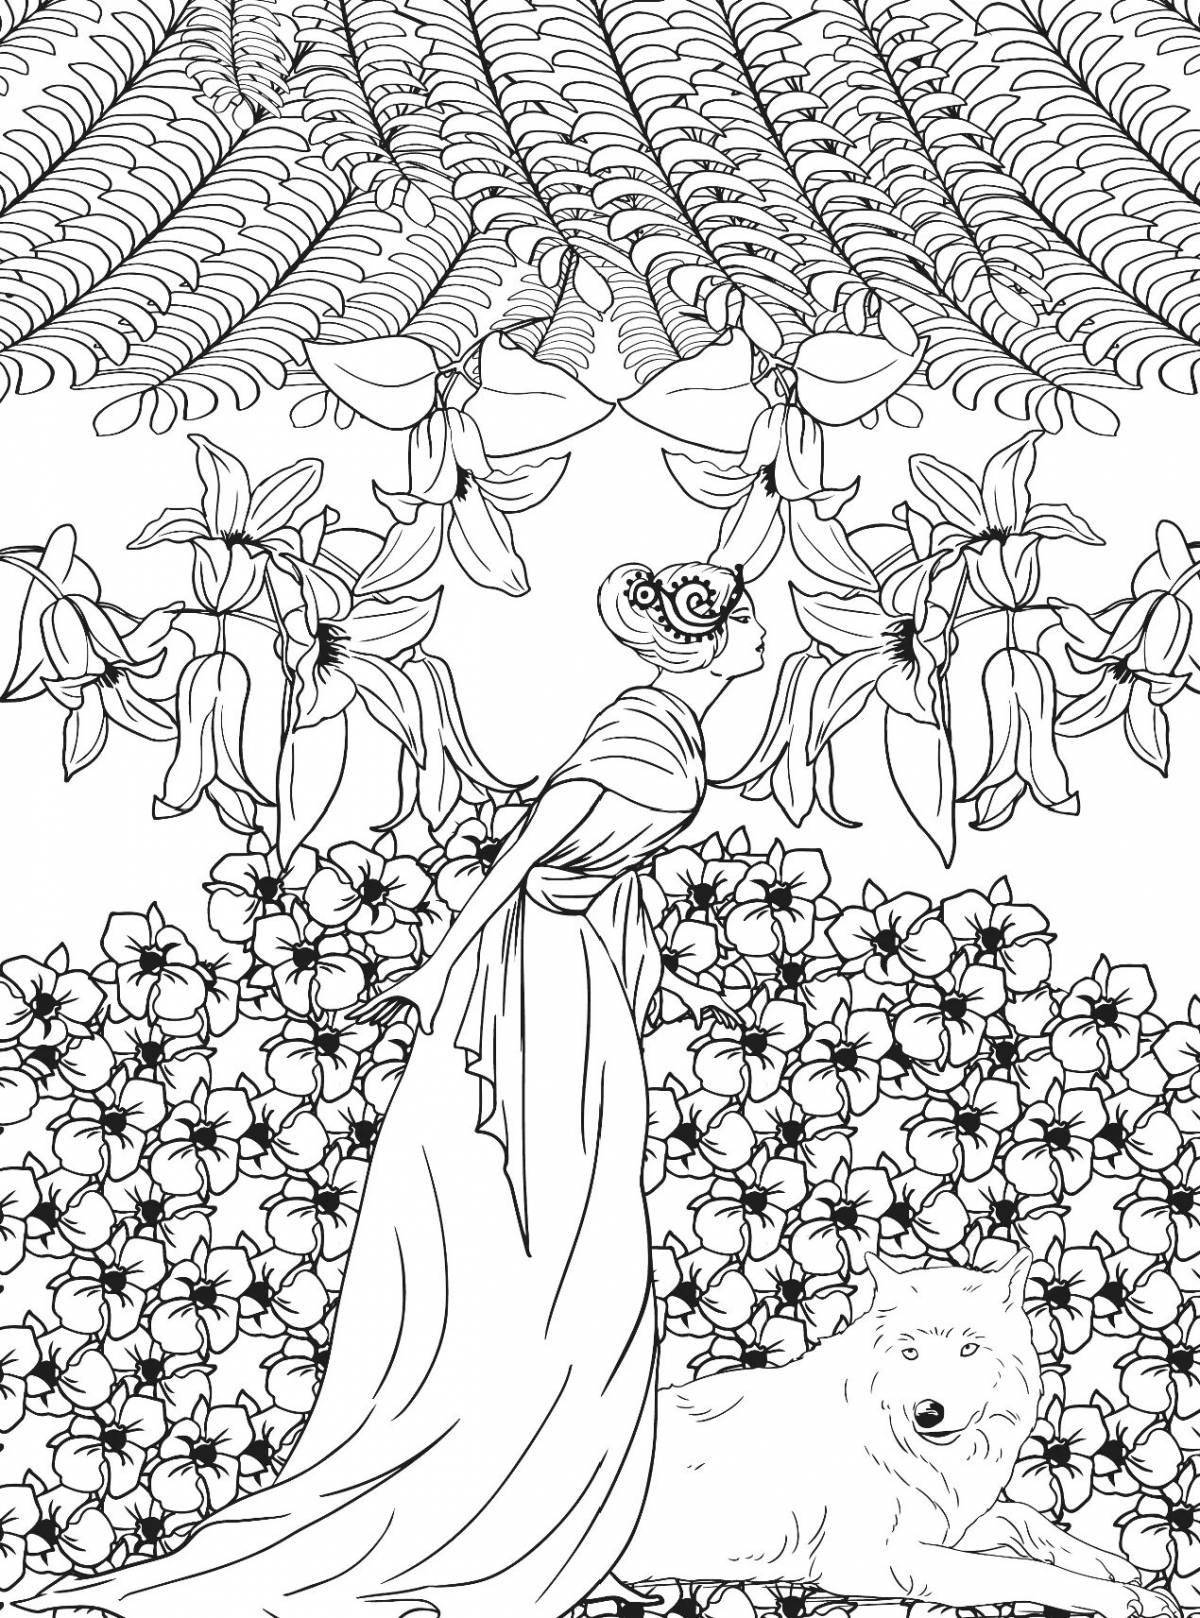 Soothing coloring book anti-stress forest